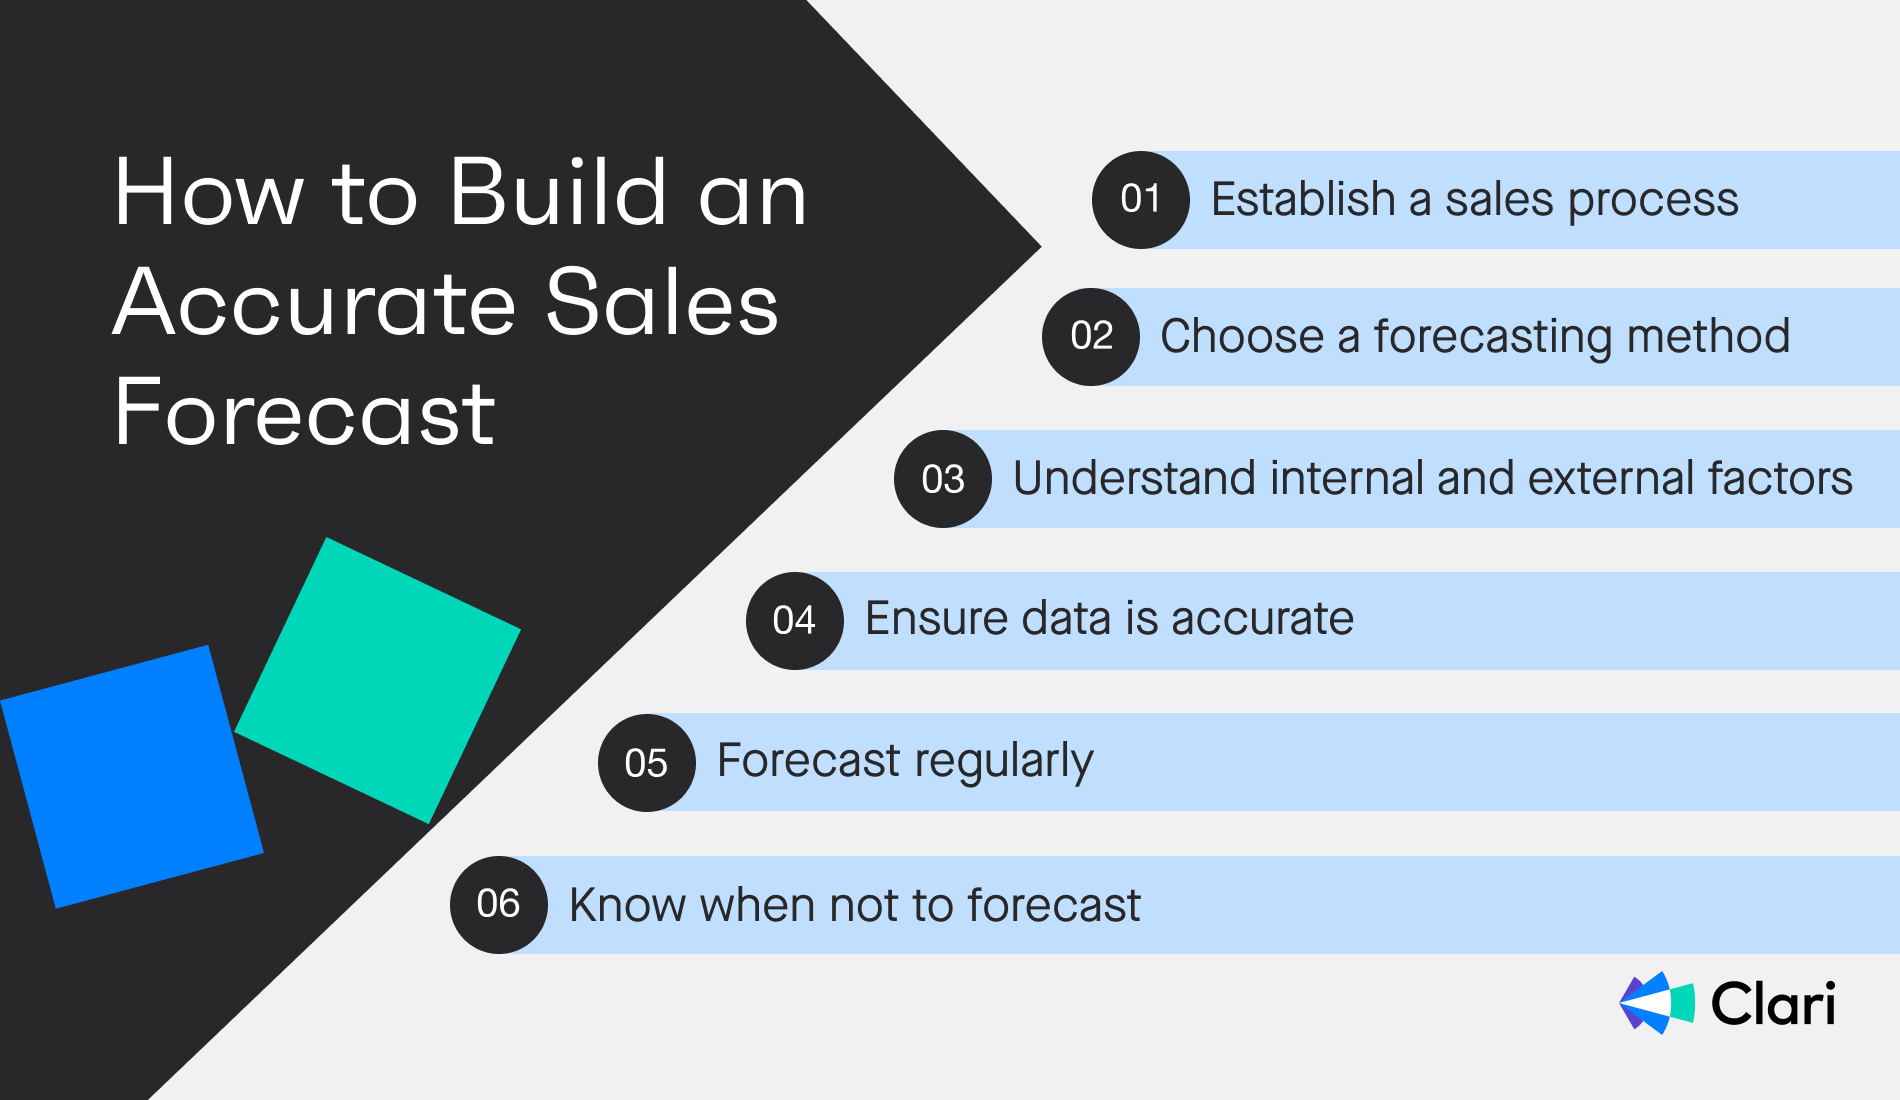 Steps for accurately building a sales forecast